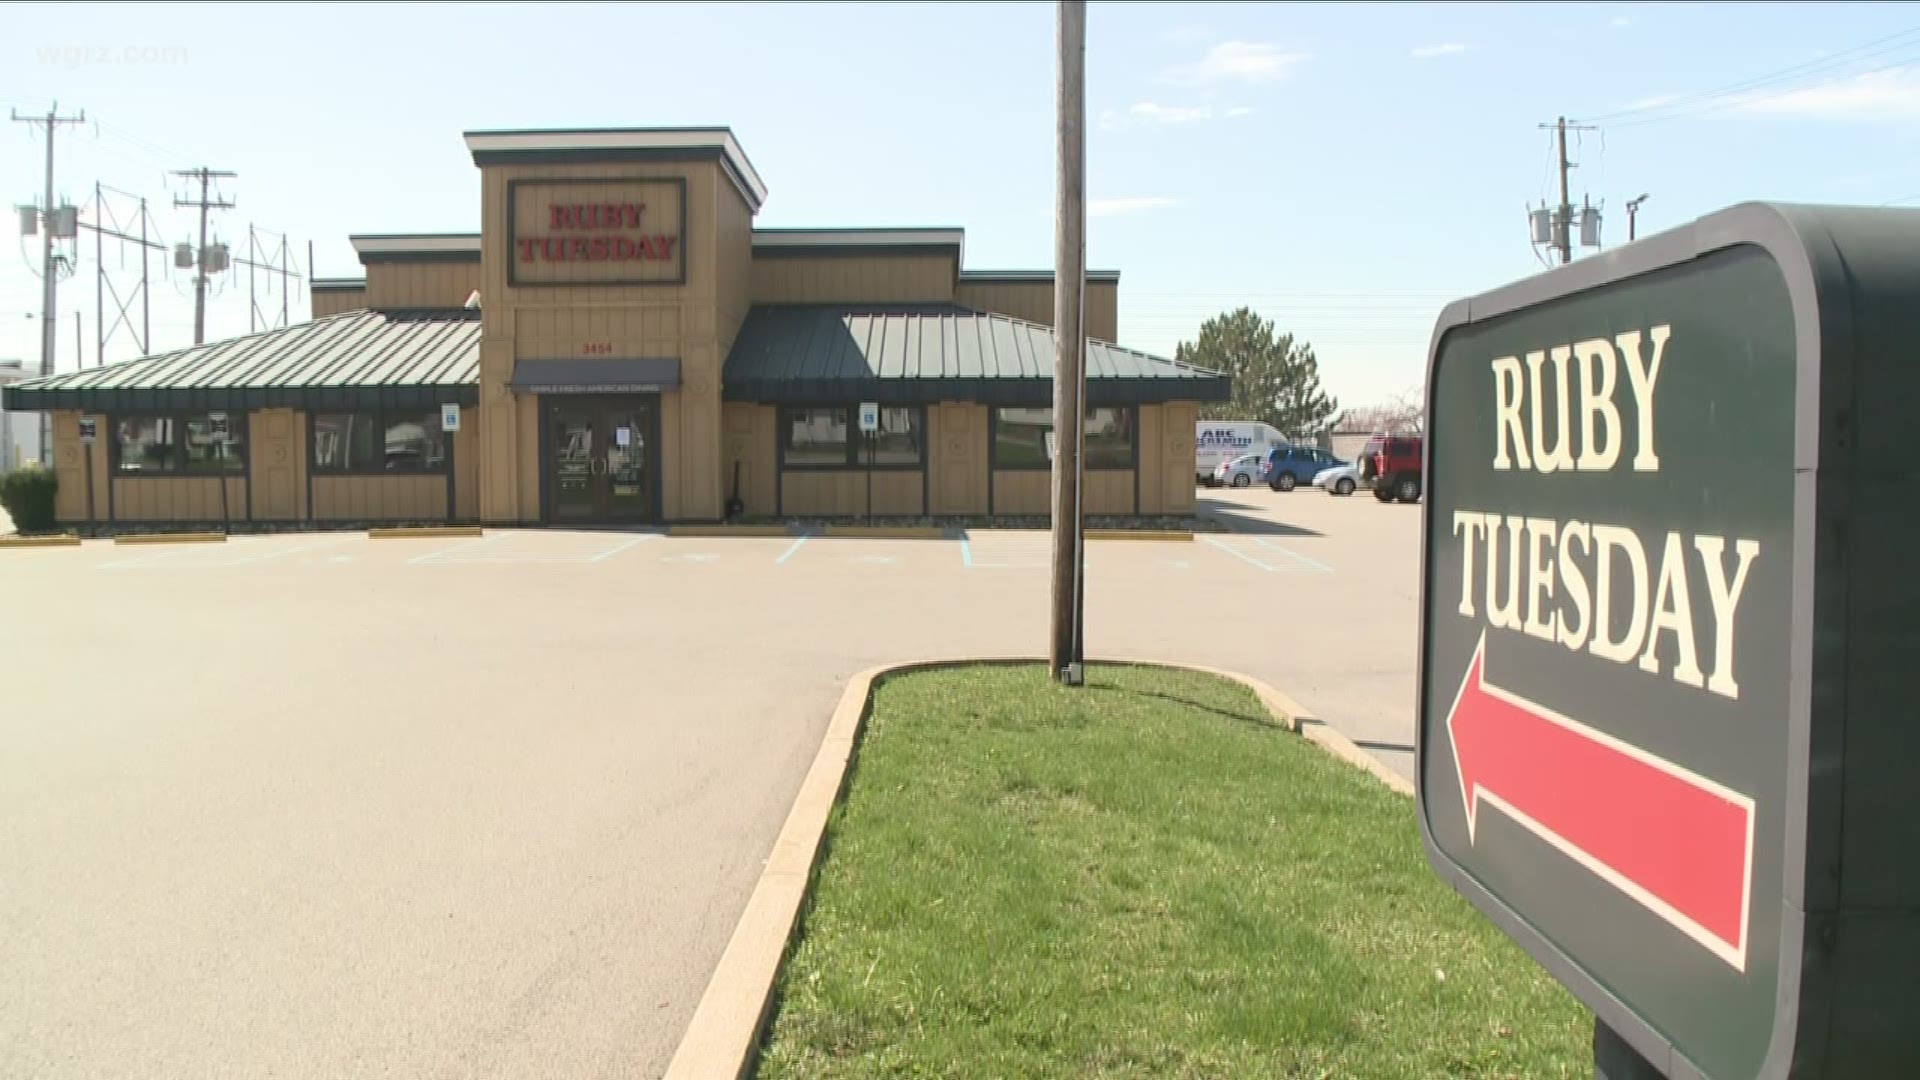 The Ruby Tuesday restaurant near the McKinley Mall closed unexpectedly.